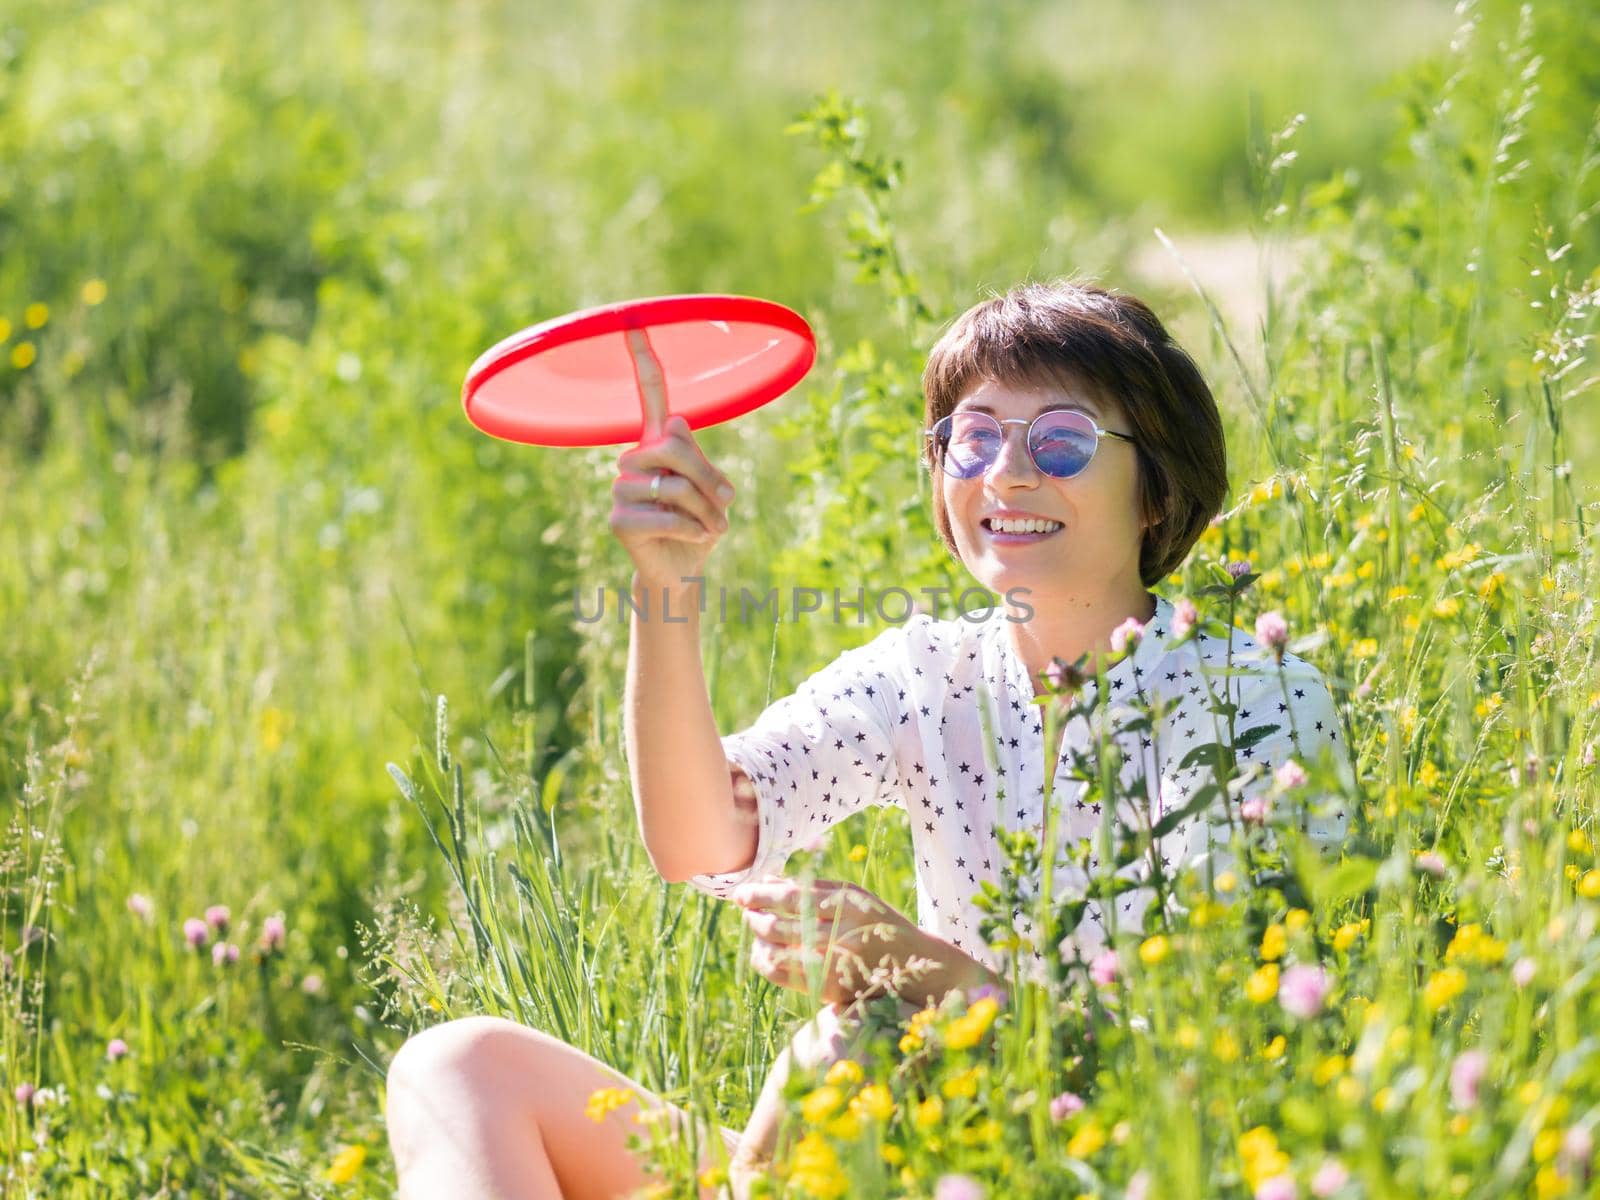 Woman in colorful sunglasses plays with red frisbee, enjoys sunlight and flower fragrance on grass field. Summer vibes. Relax outdoors. Self-soothing. by aksenovko